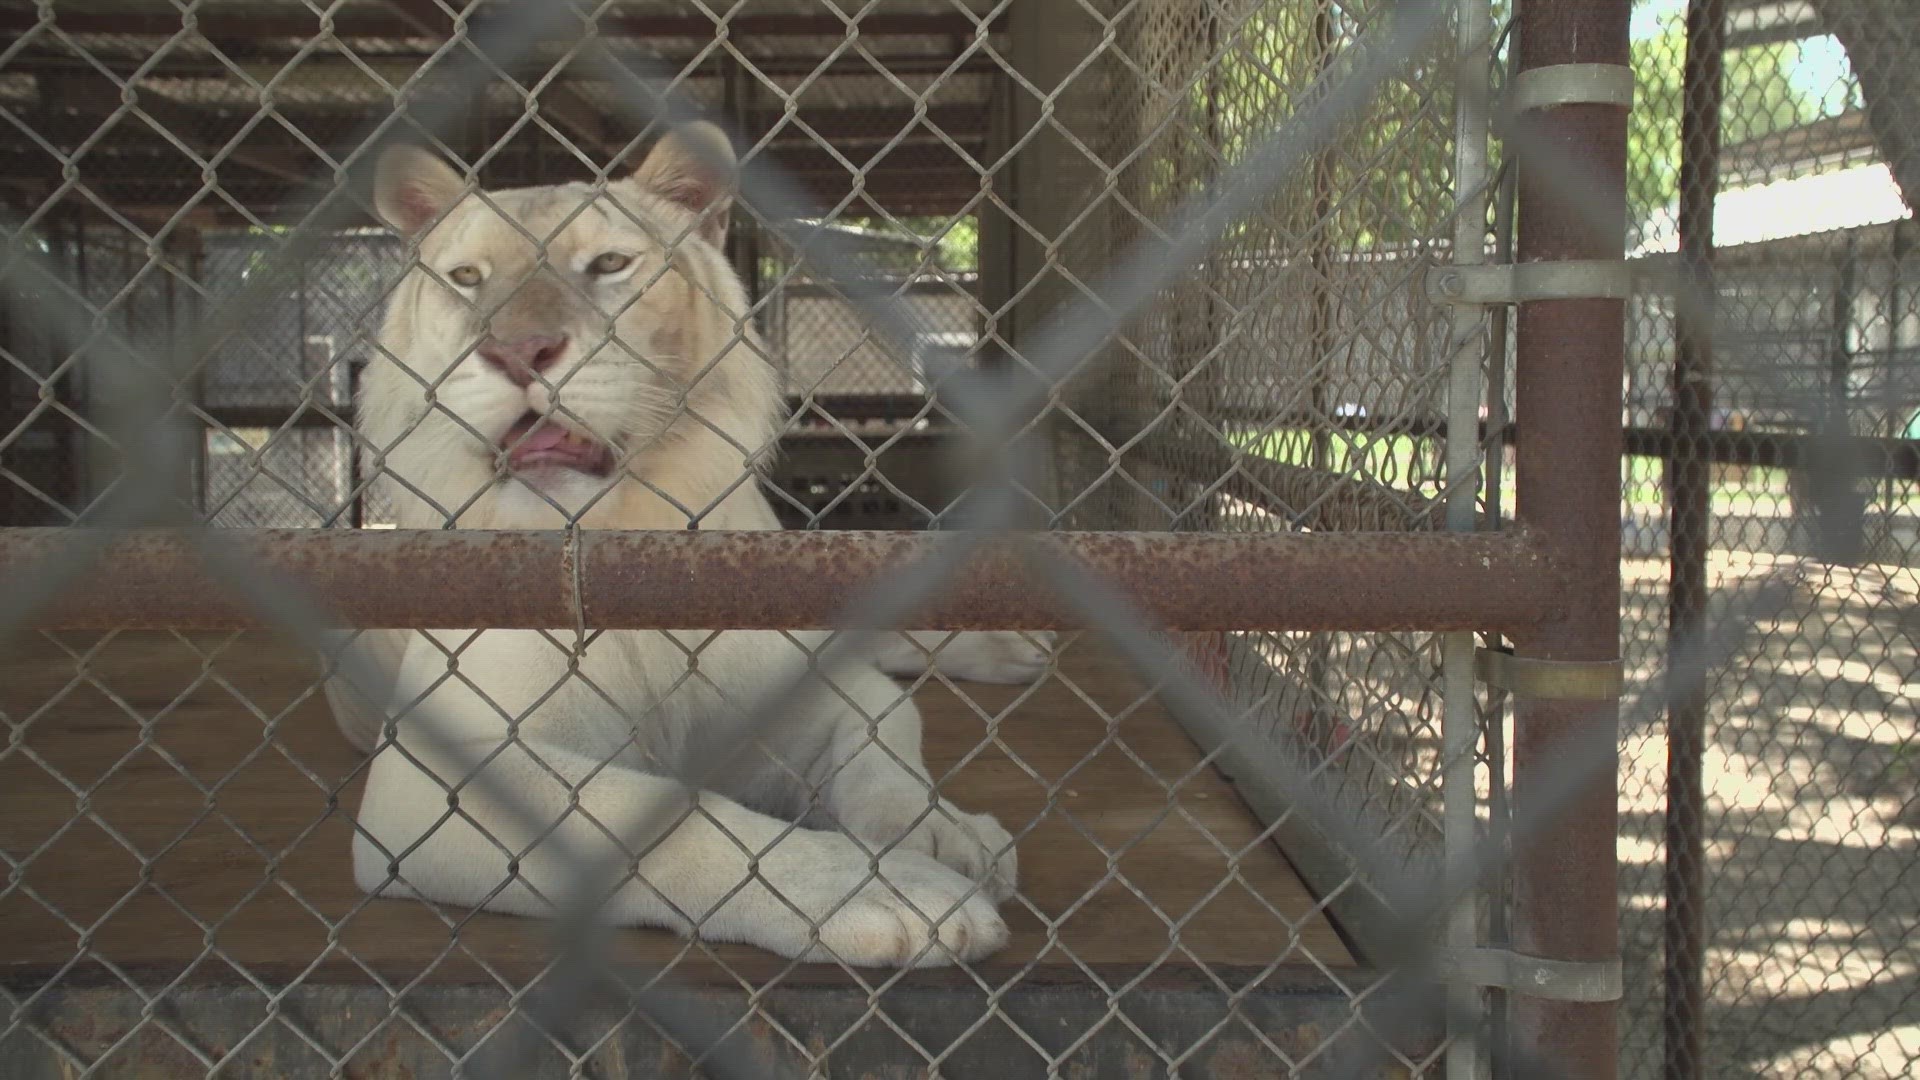 An animal sanctuary in Wylie is now home to several big cats that were once owned by famed duo Siegfried & Roy at the Secret Garden in Las Vegas.